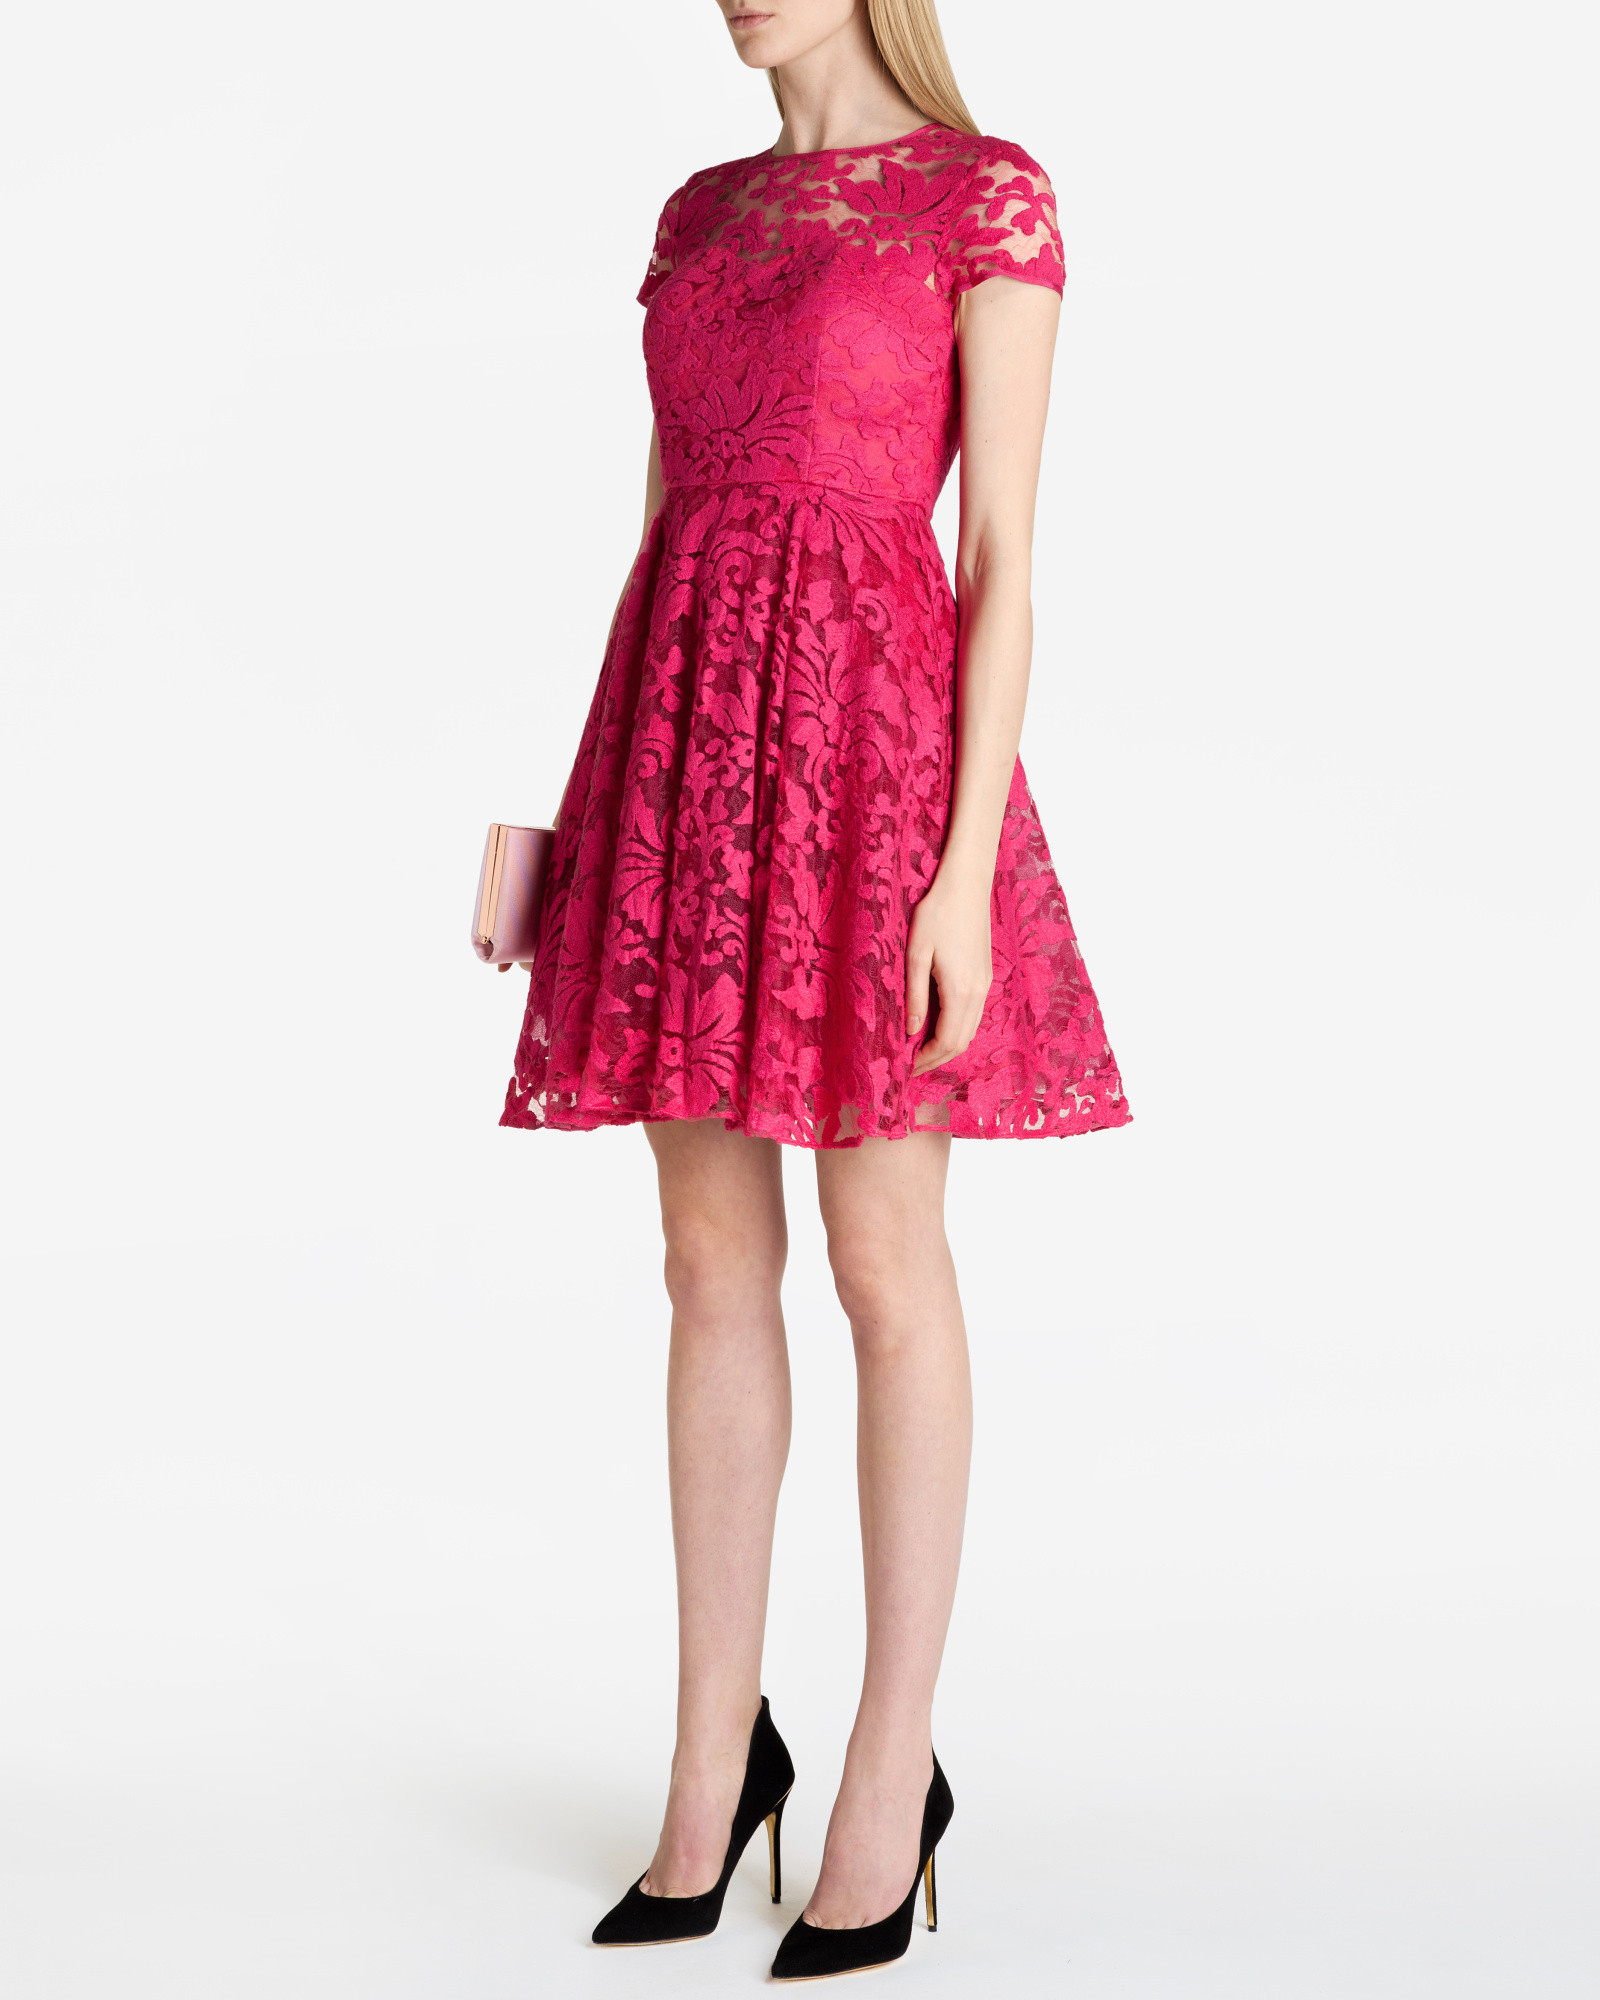 Lyst - Ted Baker Jeyla Sheer Panel Lace Dress in Pink